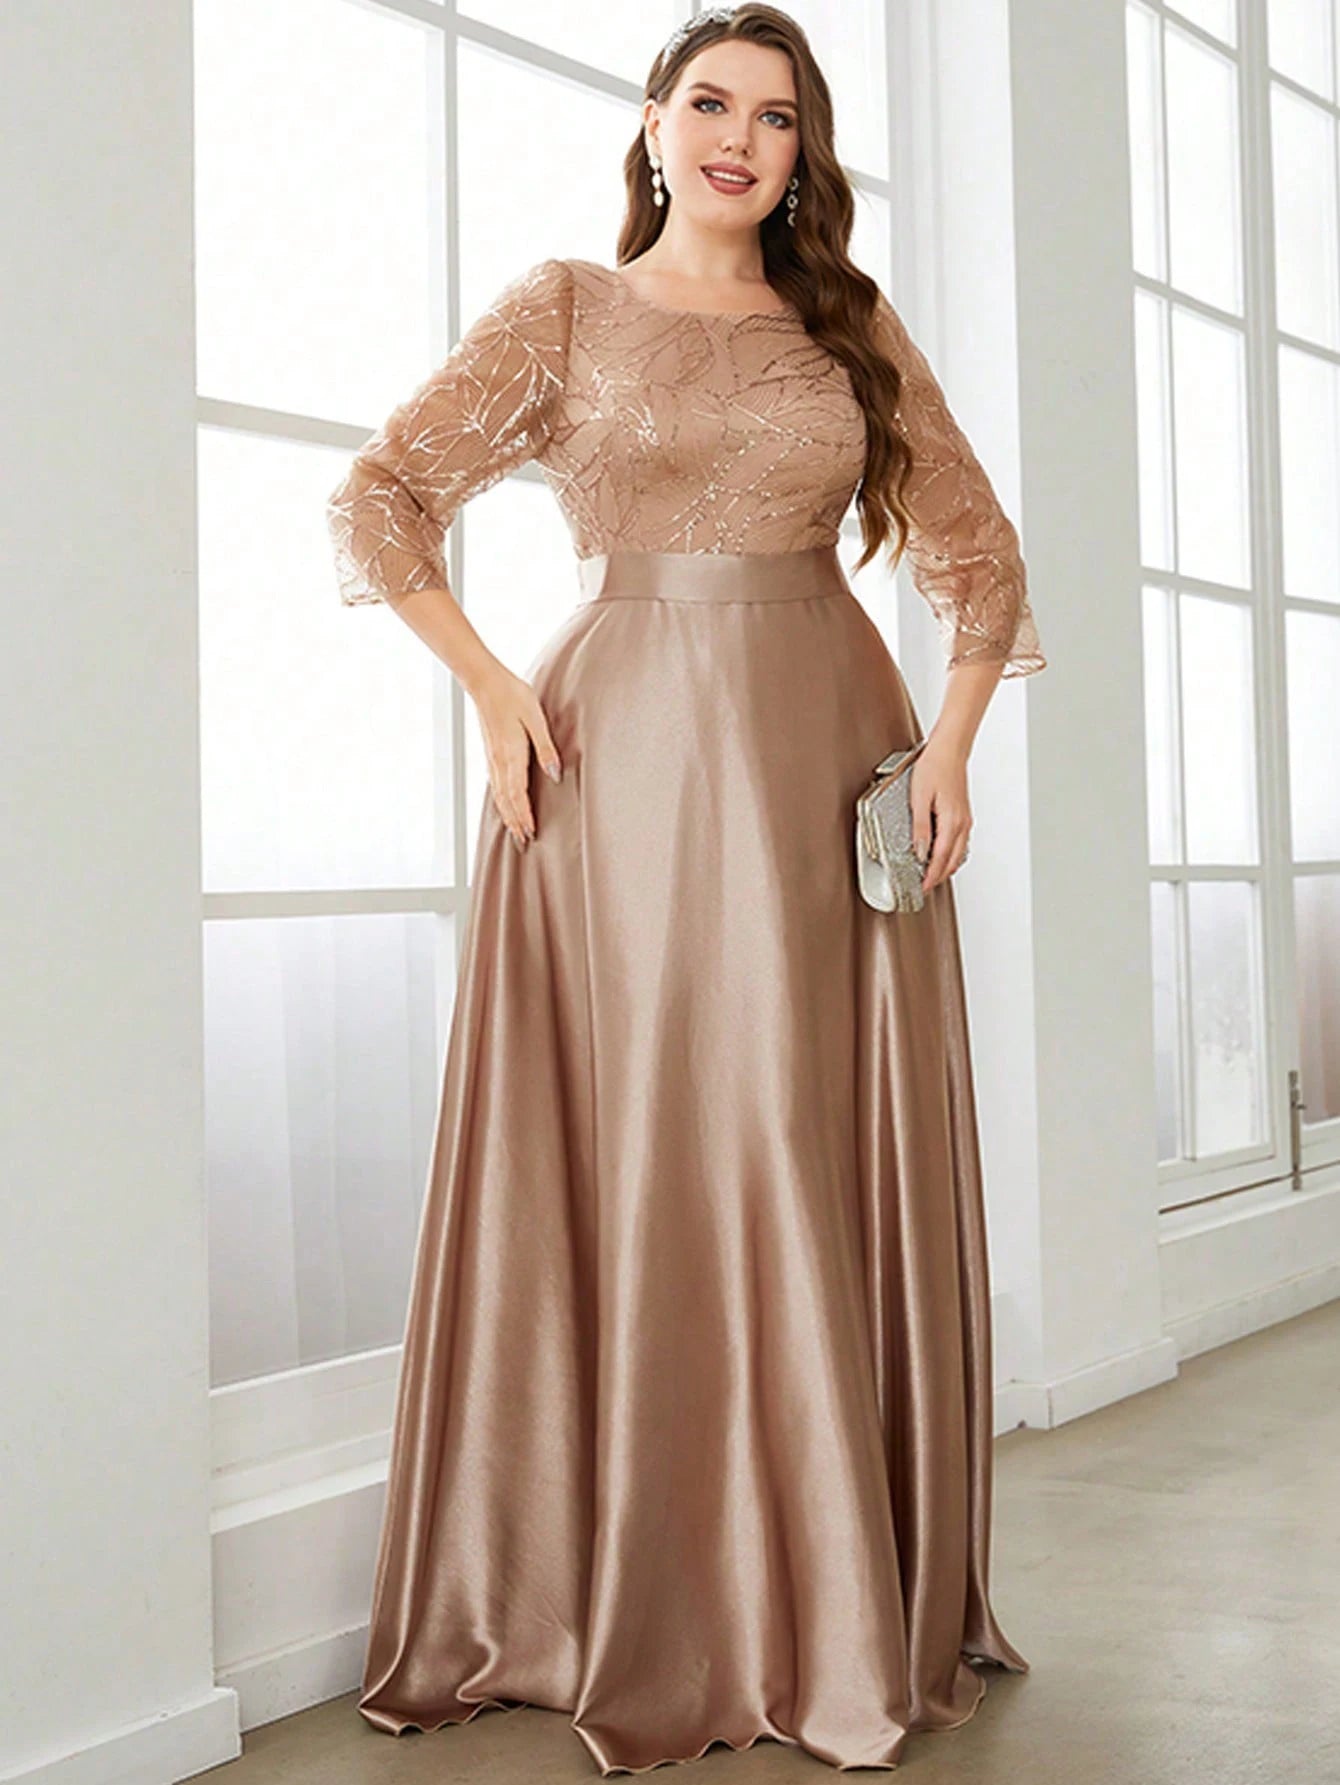 Mgiacy Crew neck long sleeve sequin patchwork satin long gown ball dress Party dress Bridesmaid dress